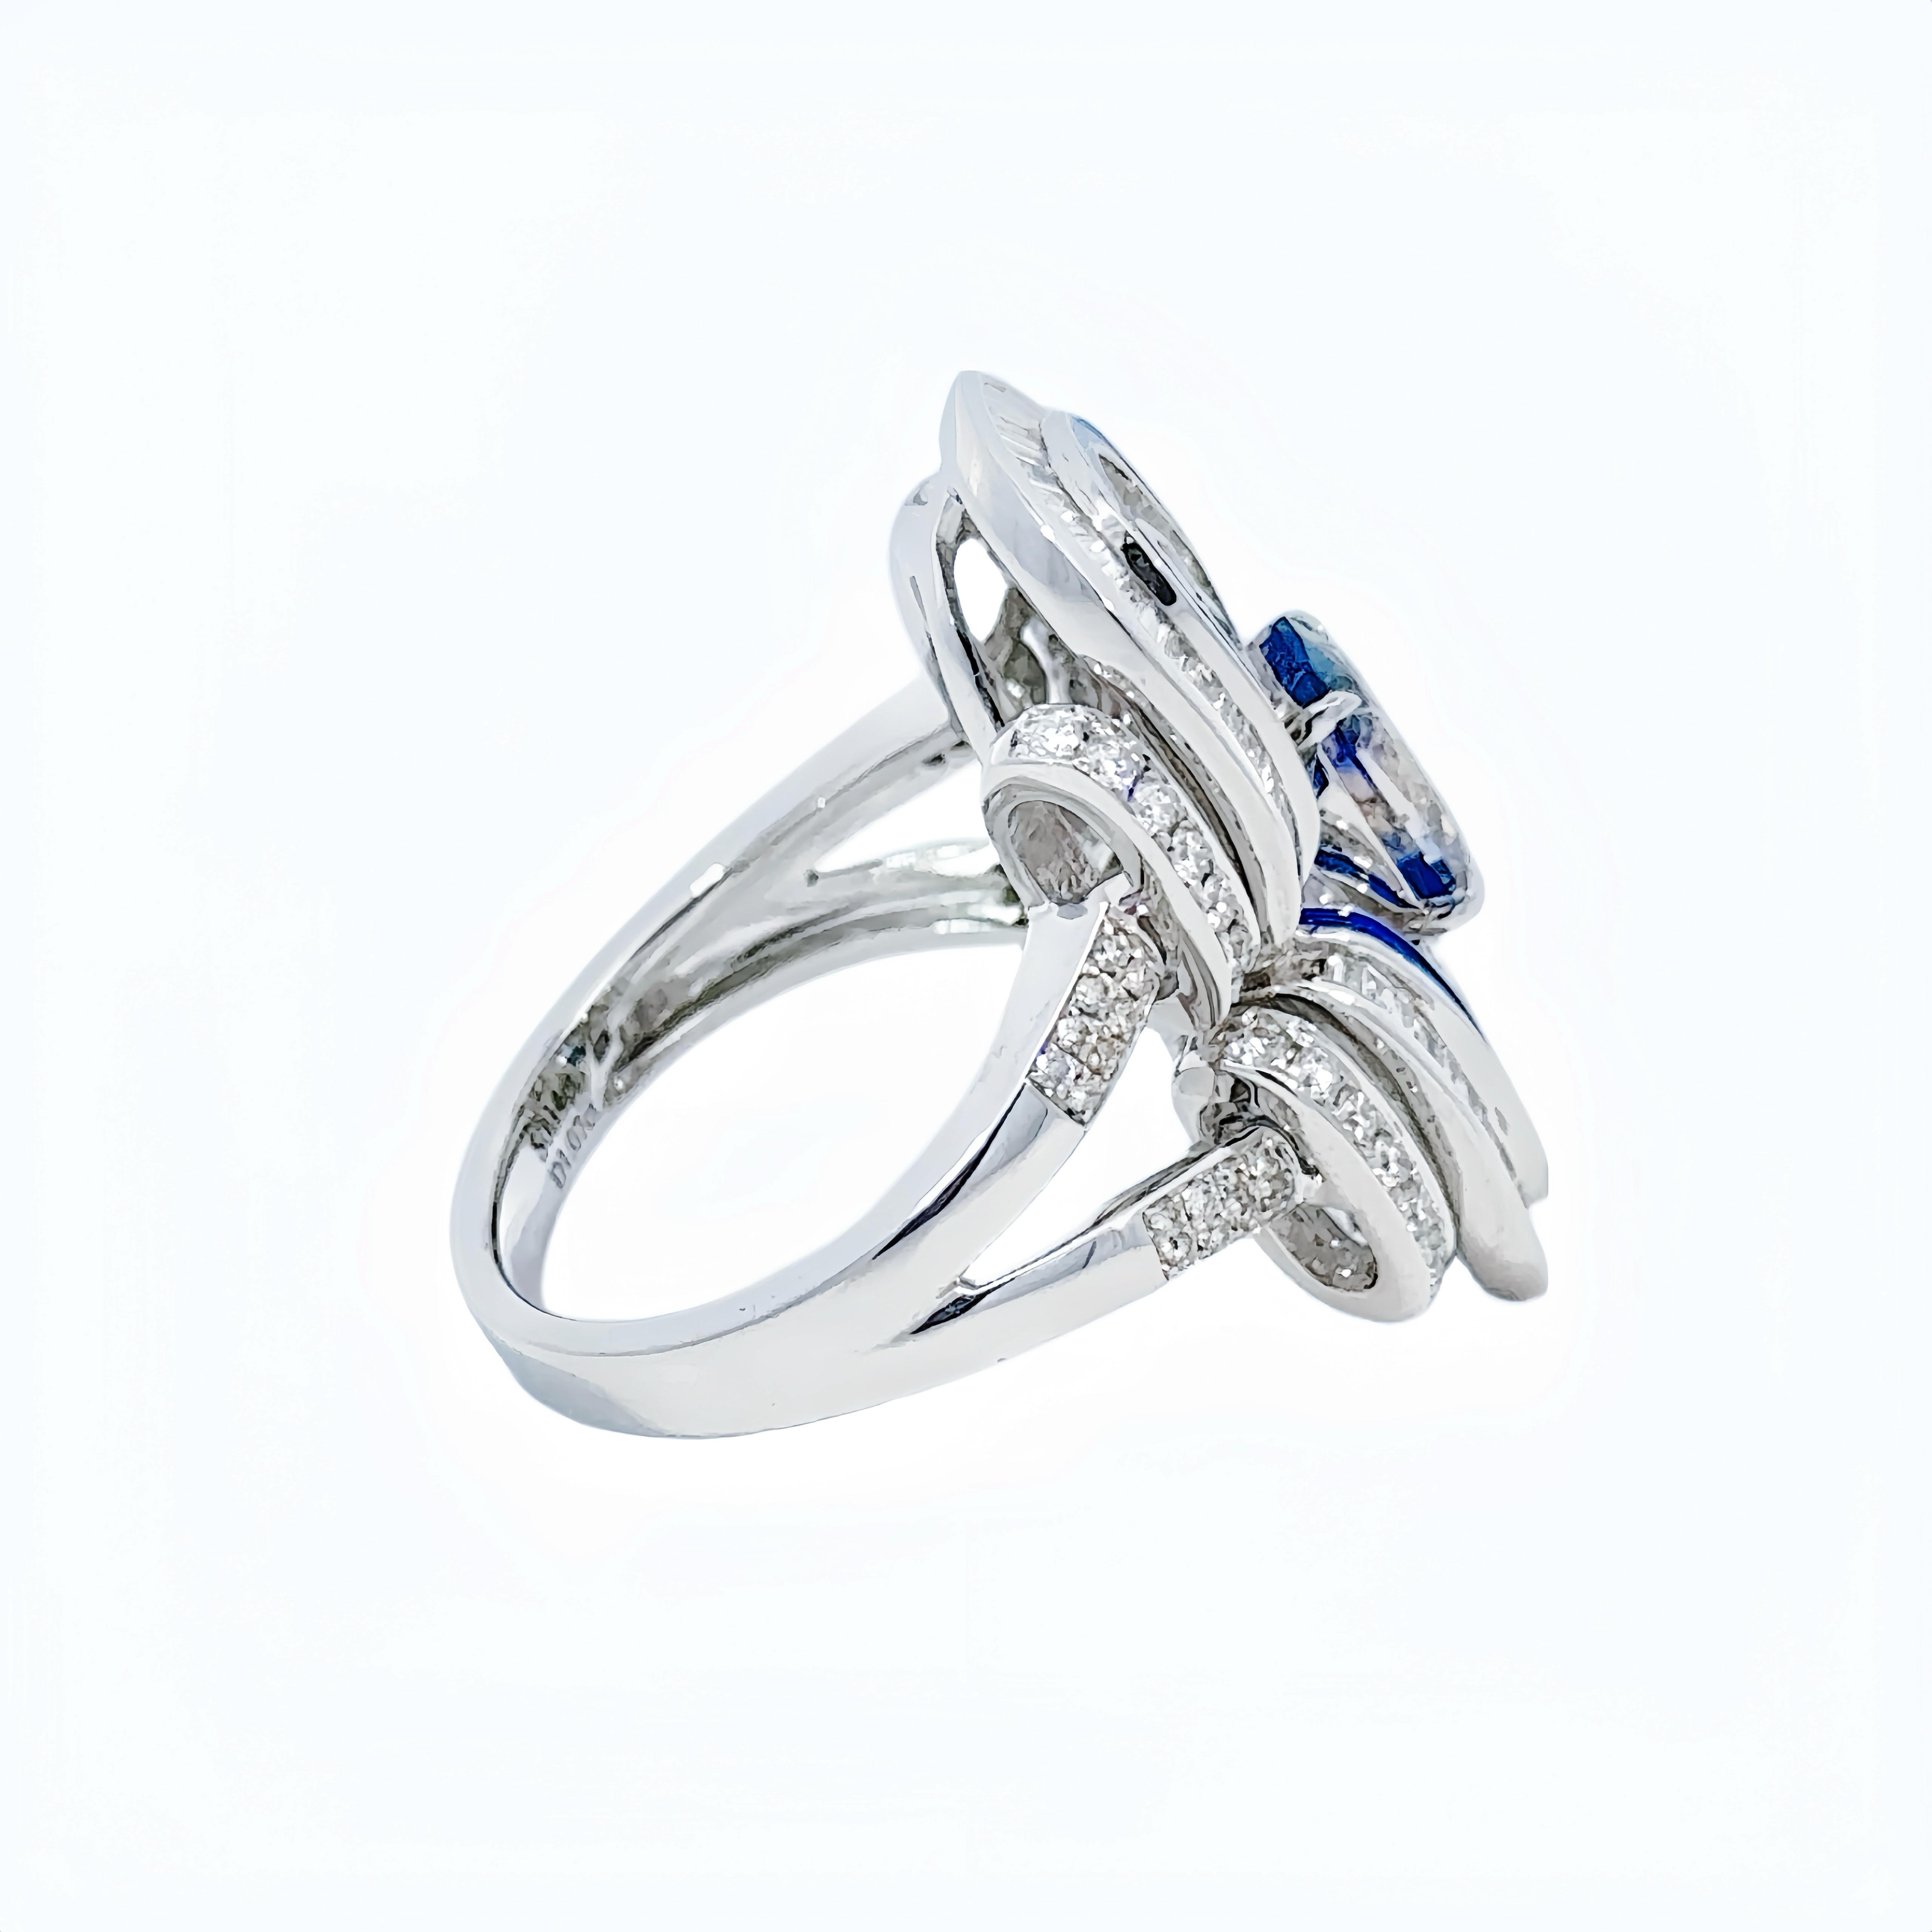 Boucheron inspired Art deco Sapphire Diamond Cocktail Ring, Made to Order For Sale 2